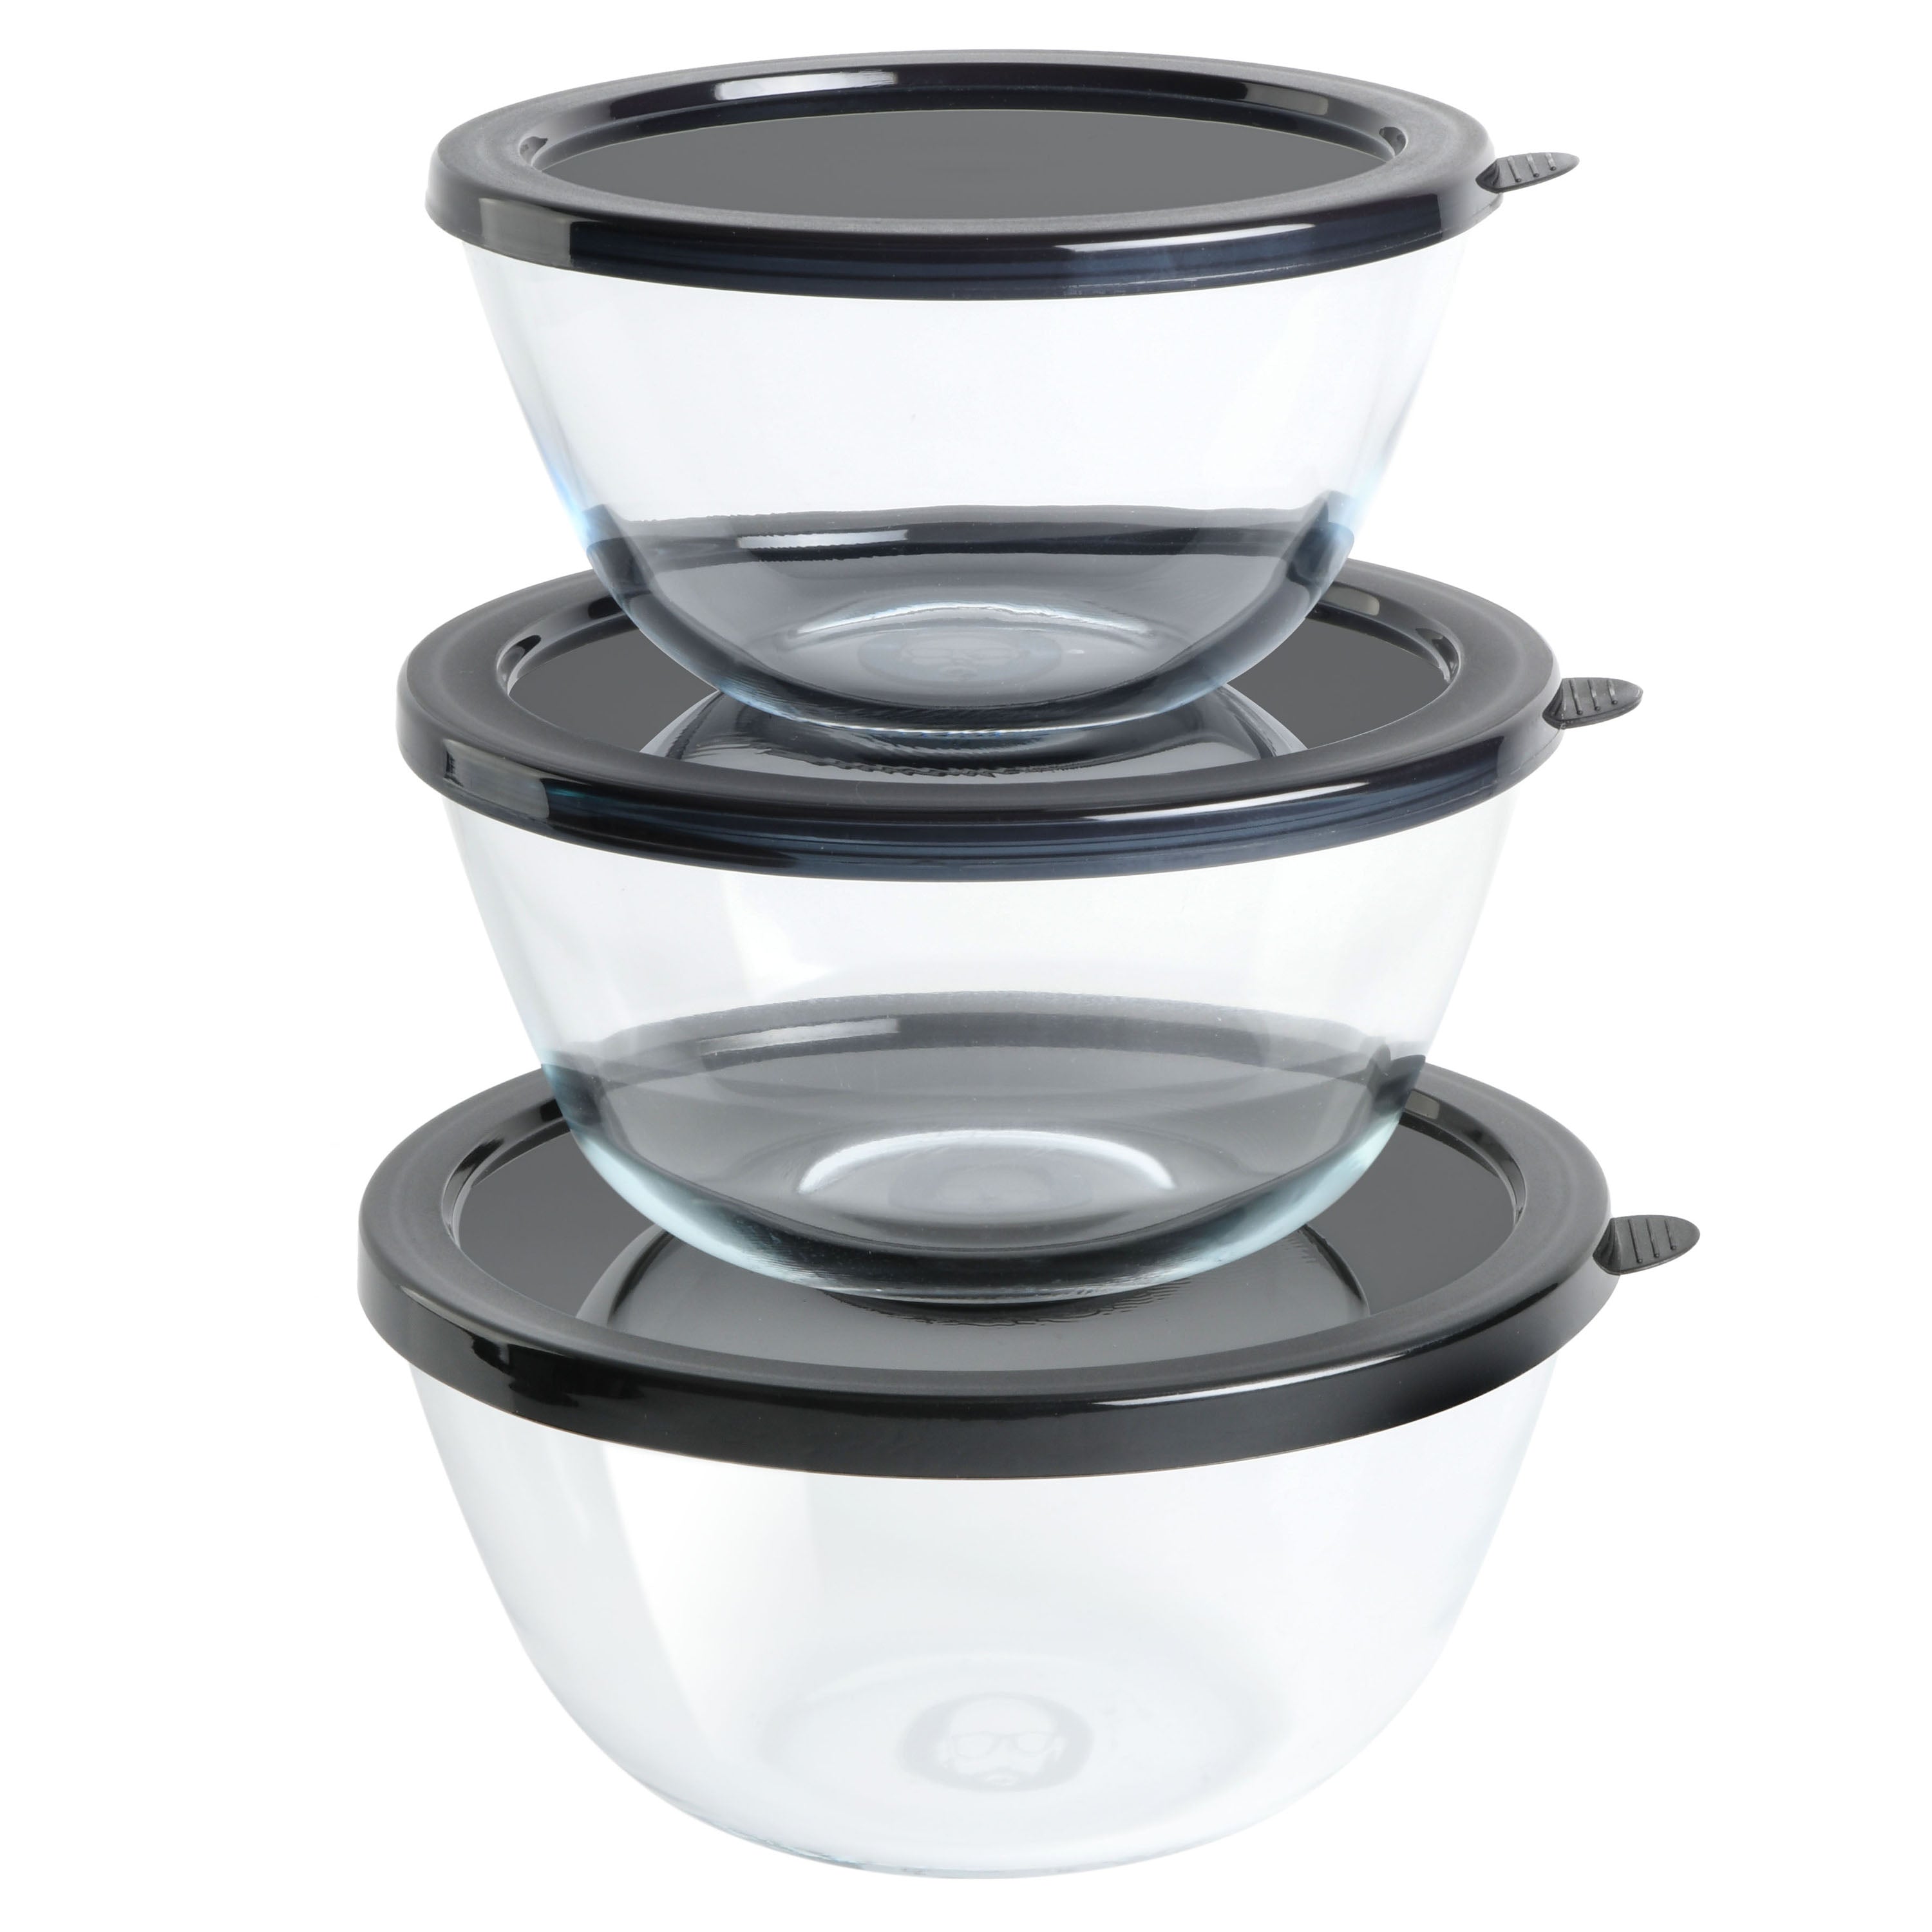 Glass Mixing Bowl Set with Airtight Lids for Kitchen Baking